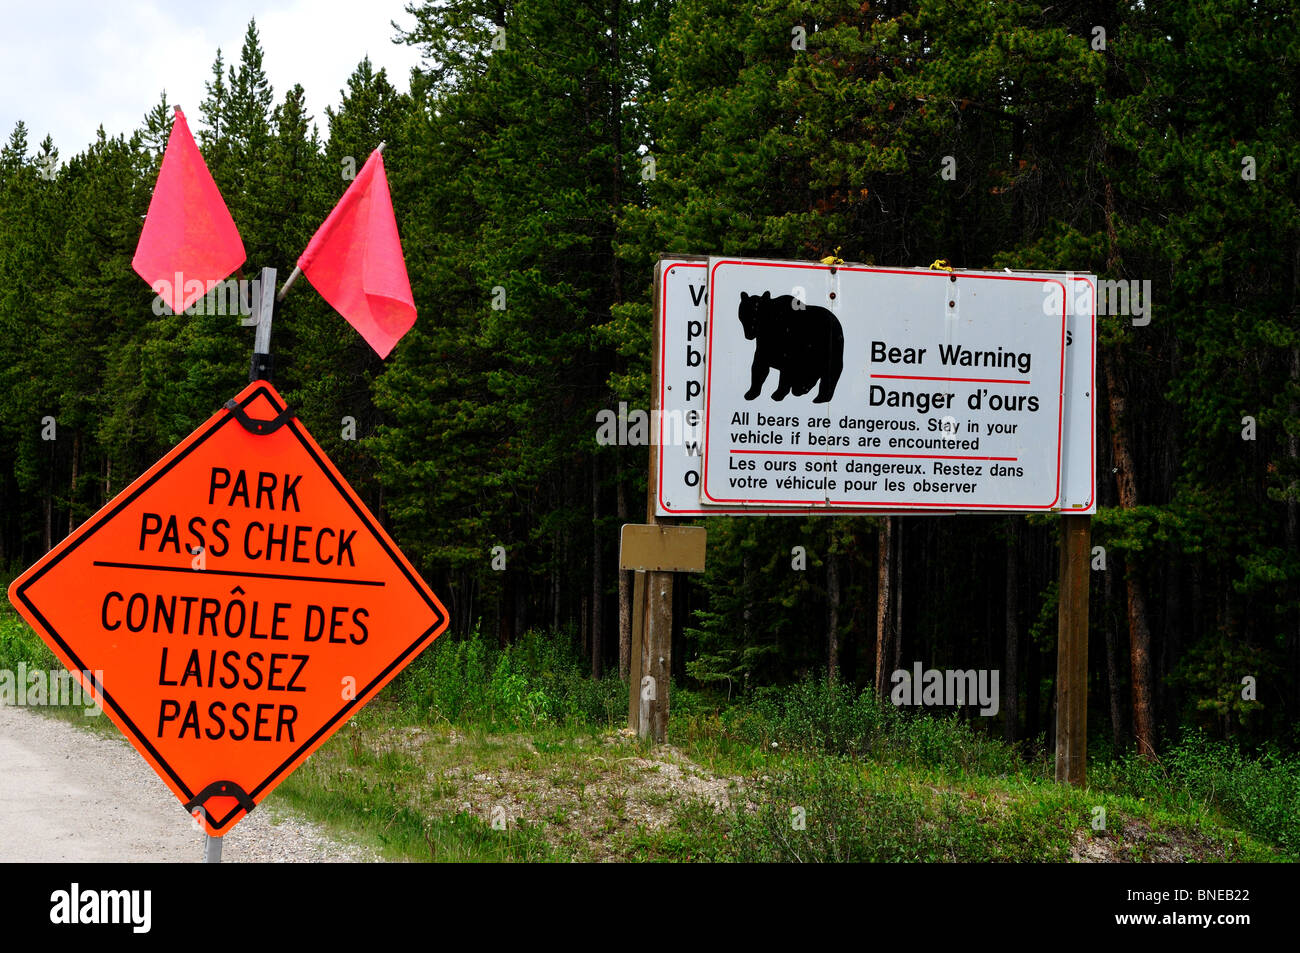 Wild Animals Ahead Warning Sign Markings By Thermmark